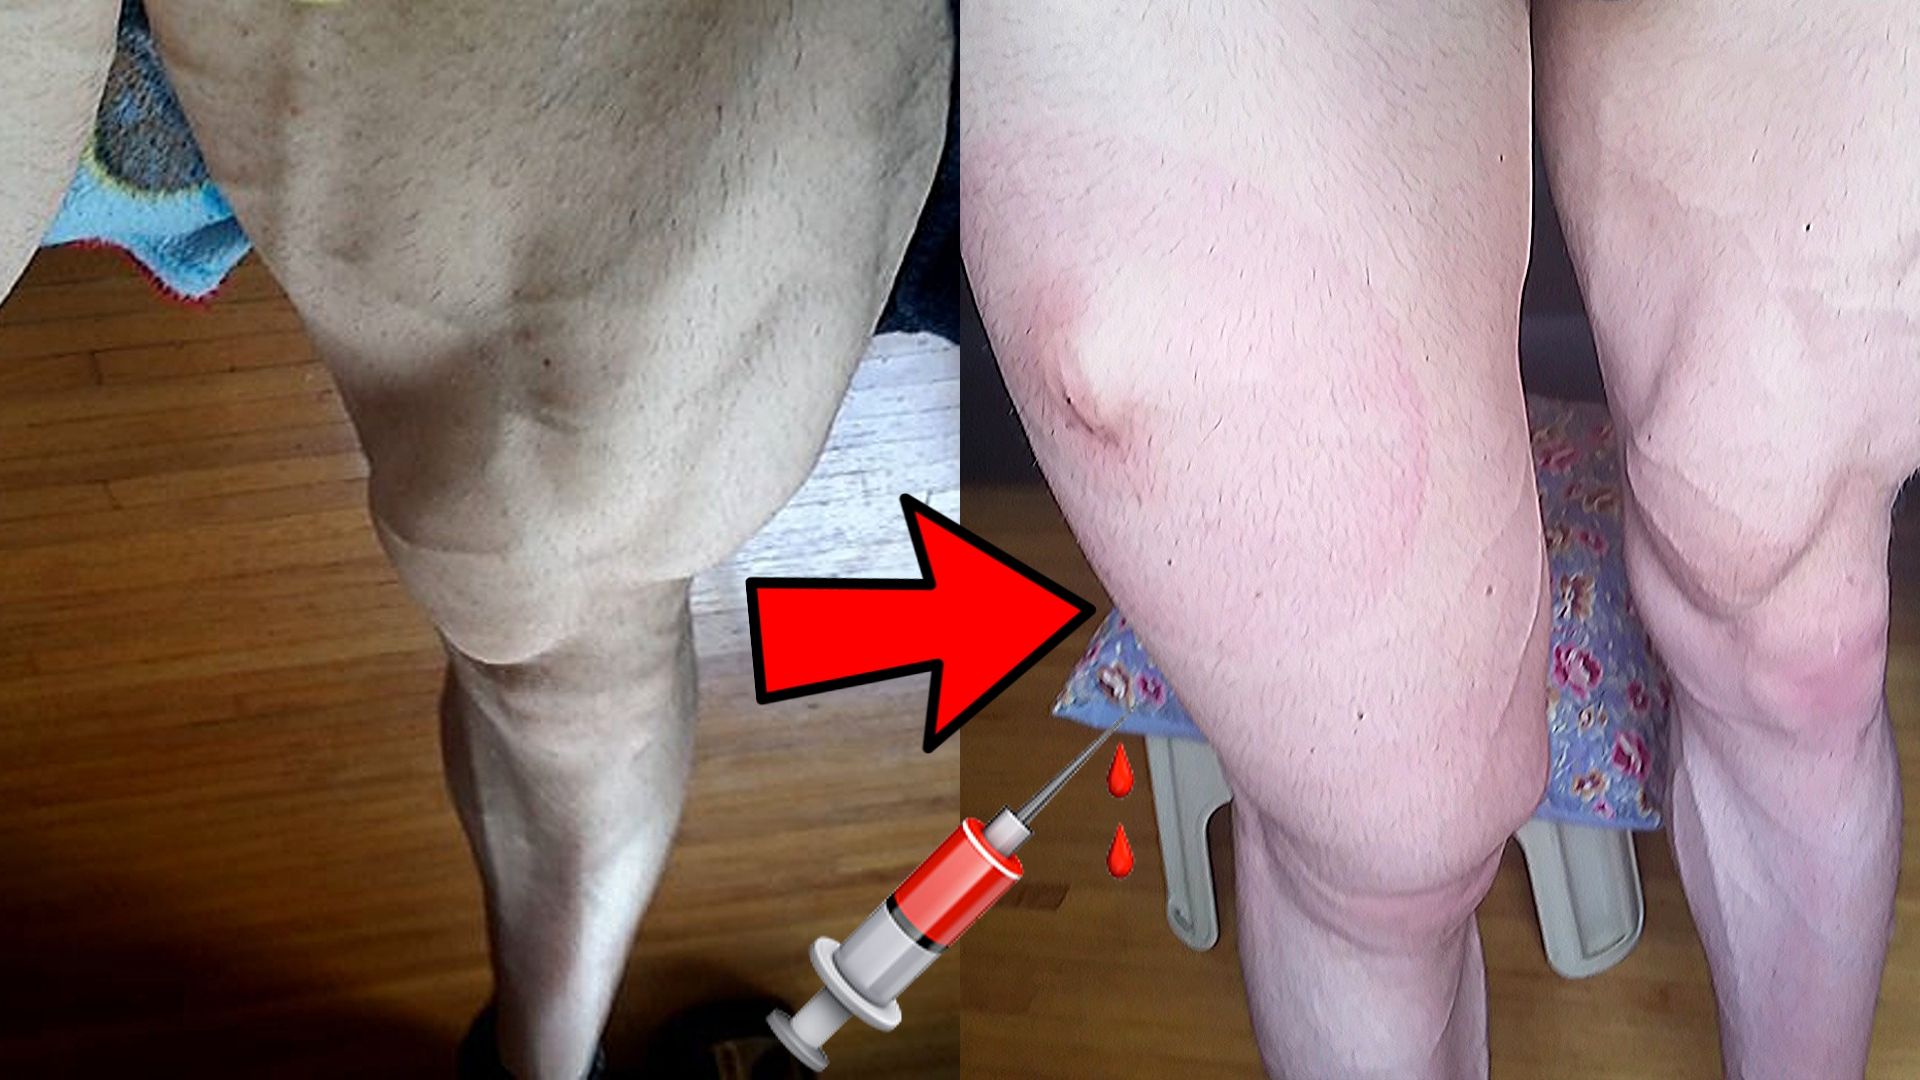 Quad Injection | Why You Should NEVER Inject Your Quads